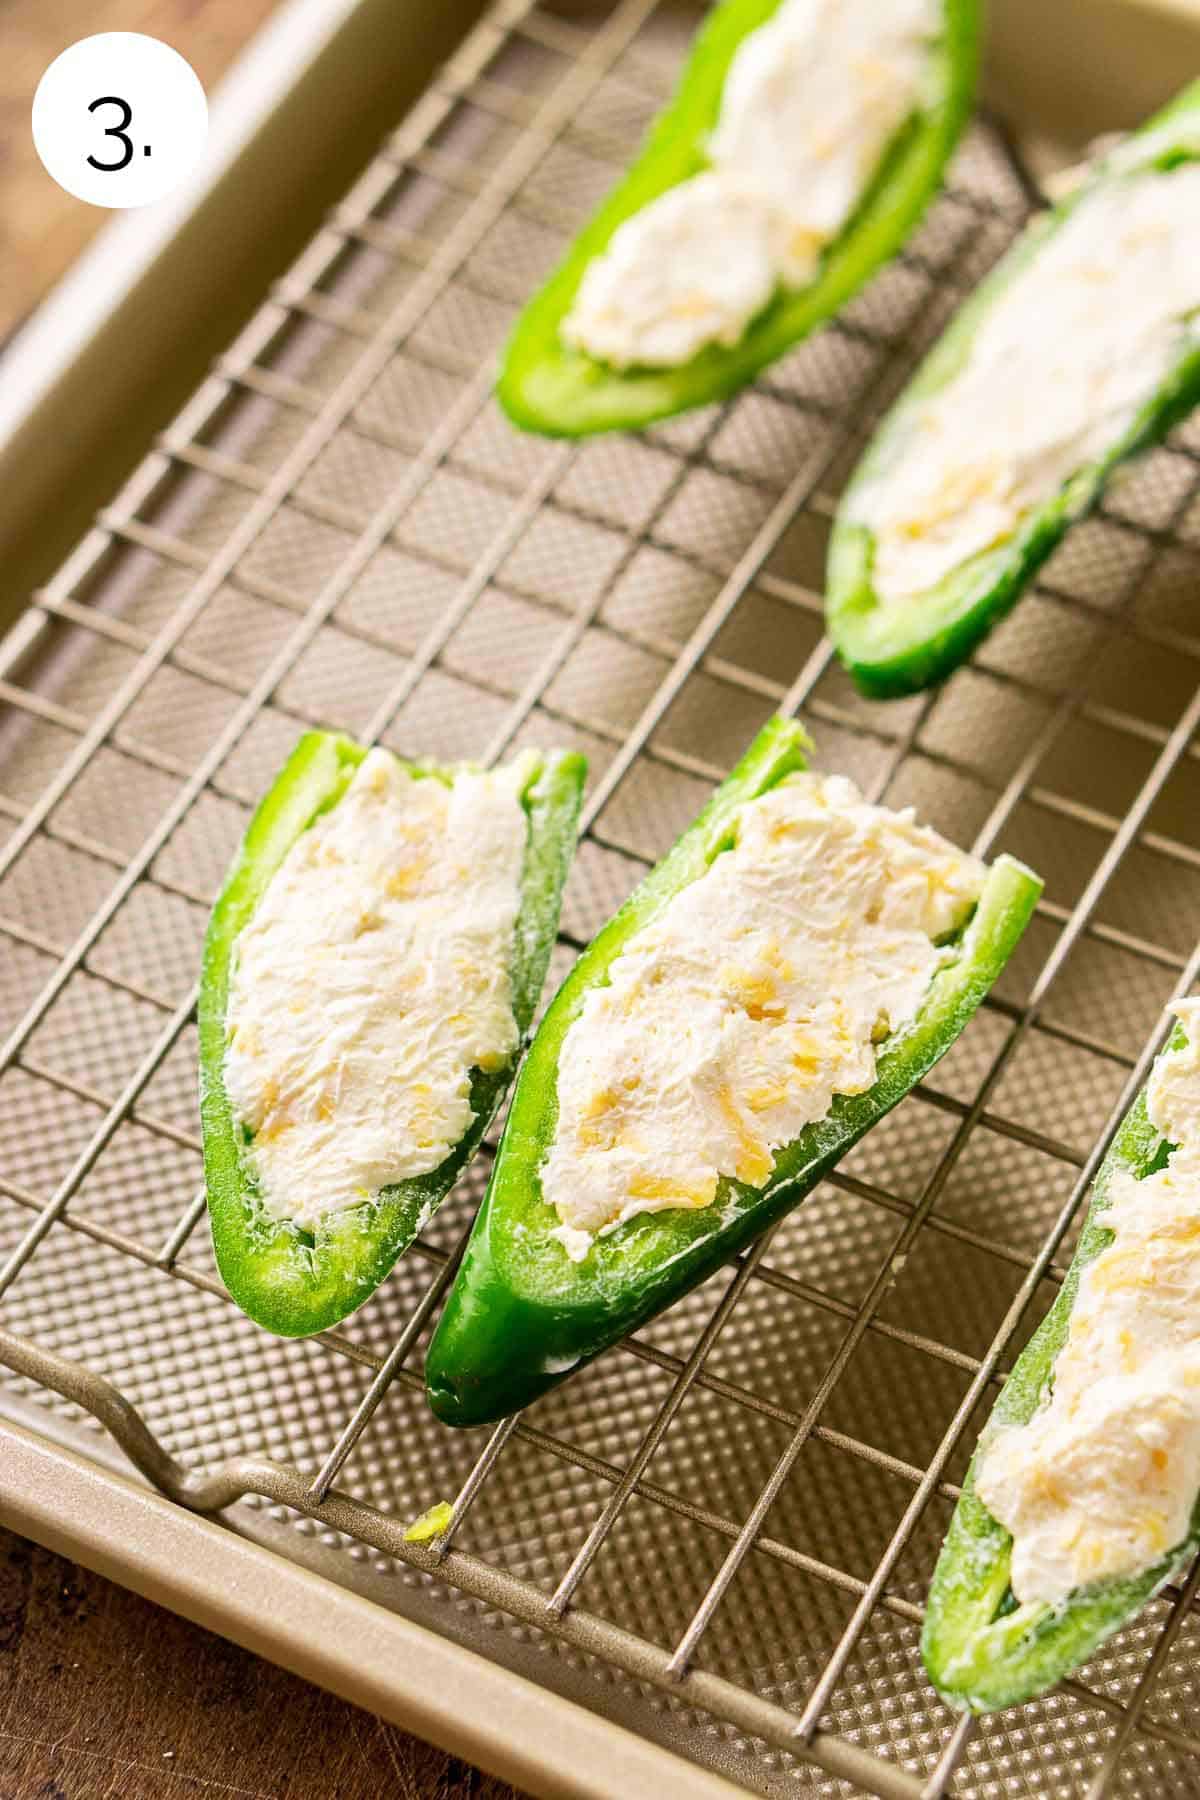 The jalapeño halves filled with the cream cheese mixture on a wire rack on top of a baking sheet.